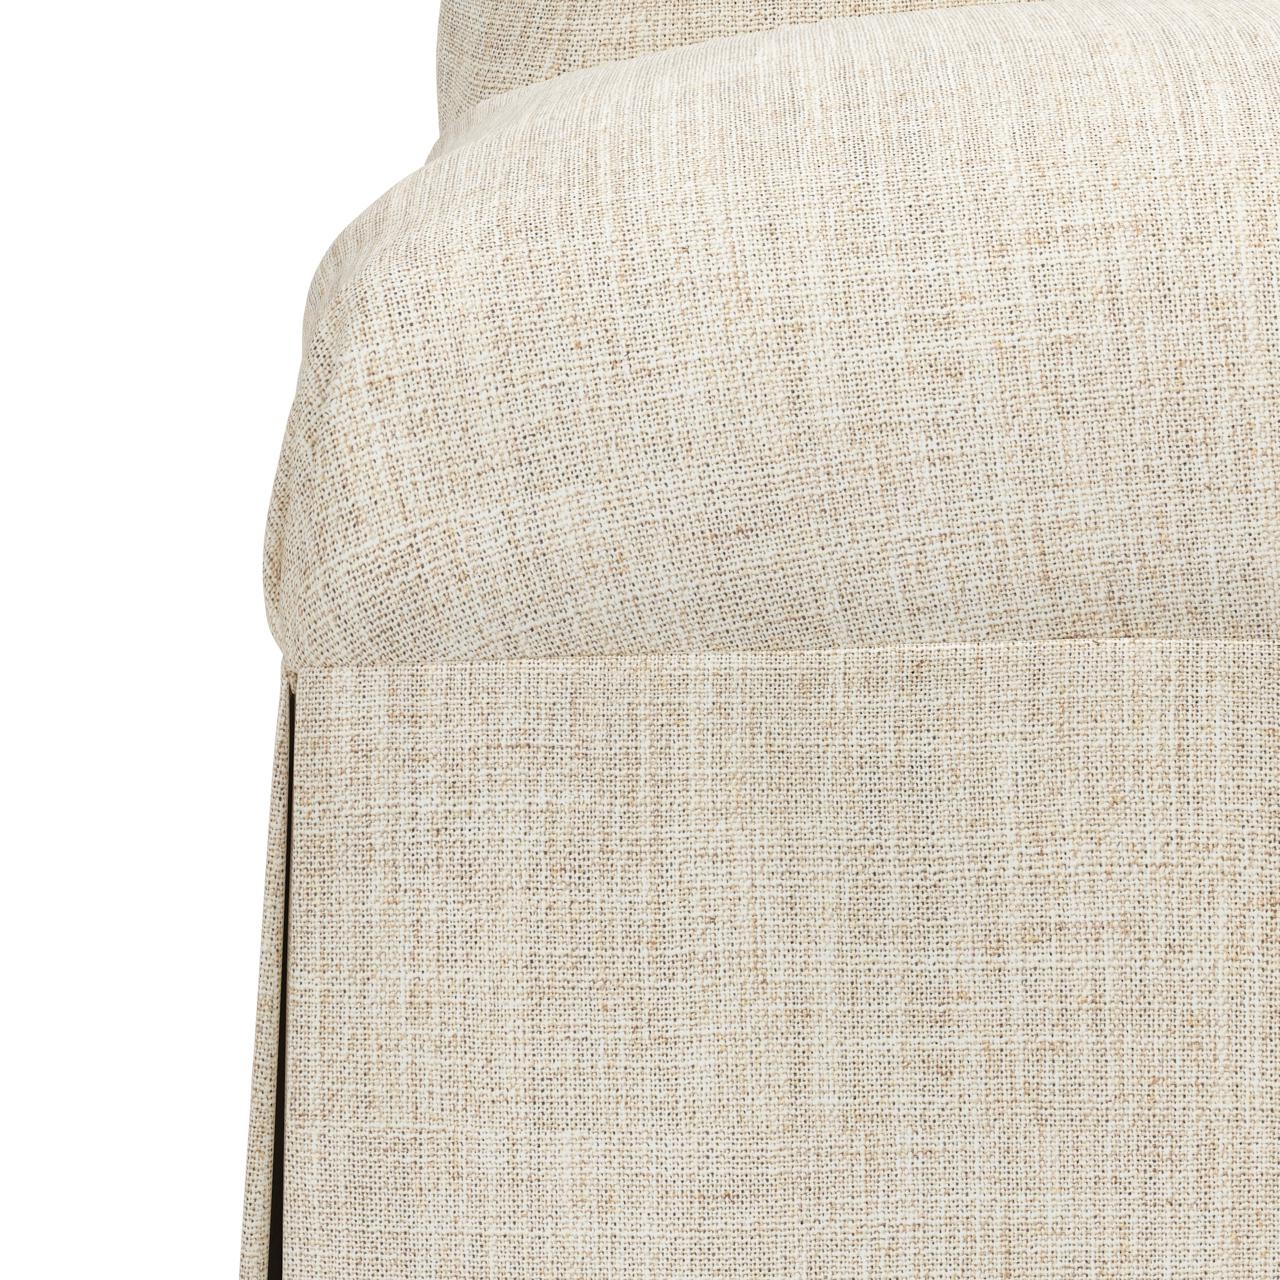 Magnolia Slipcover Dining Chair, Talc - Image 4